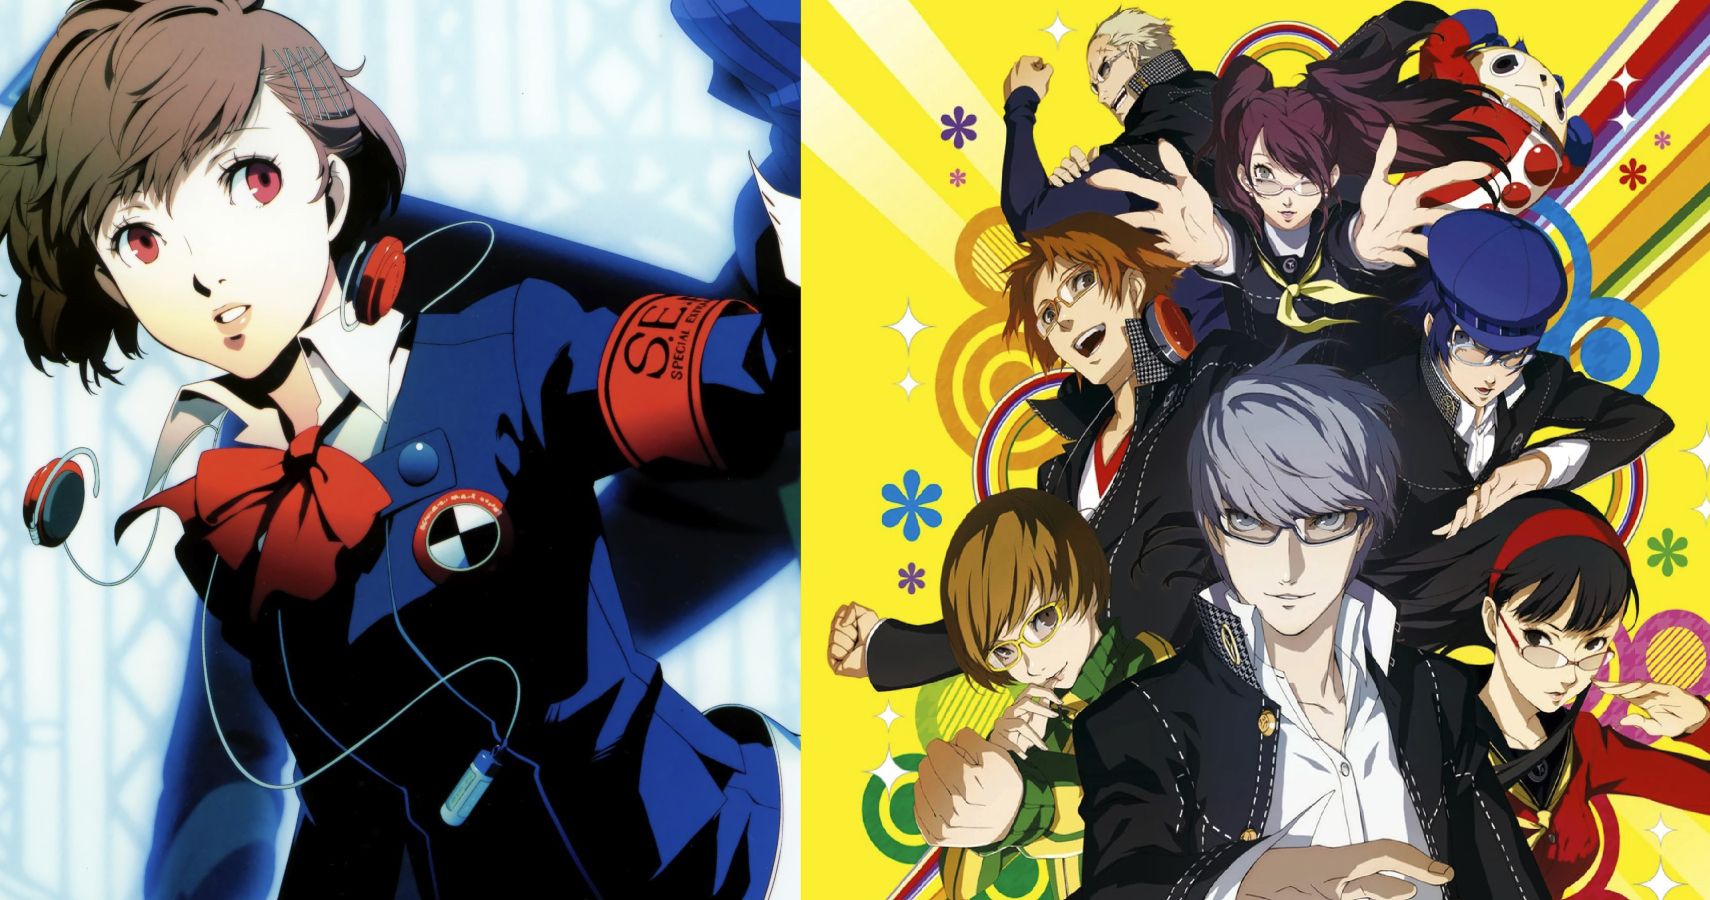 Persona 3 And Persona 4 Golden May Be Coming To PC